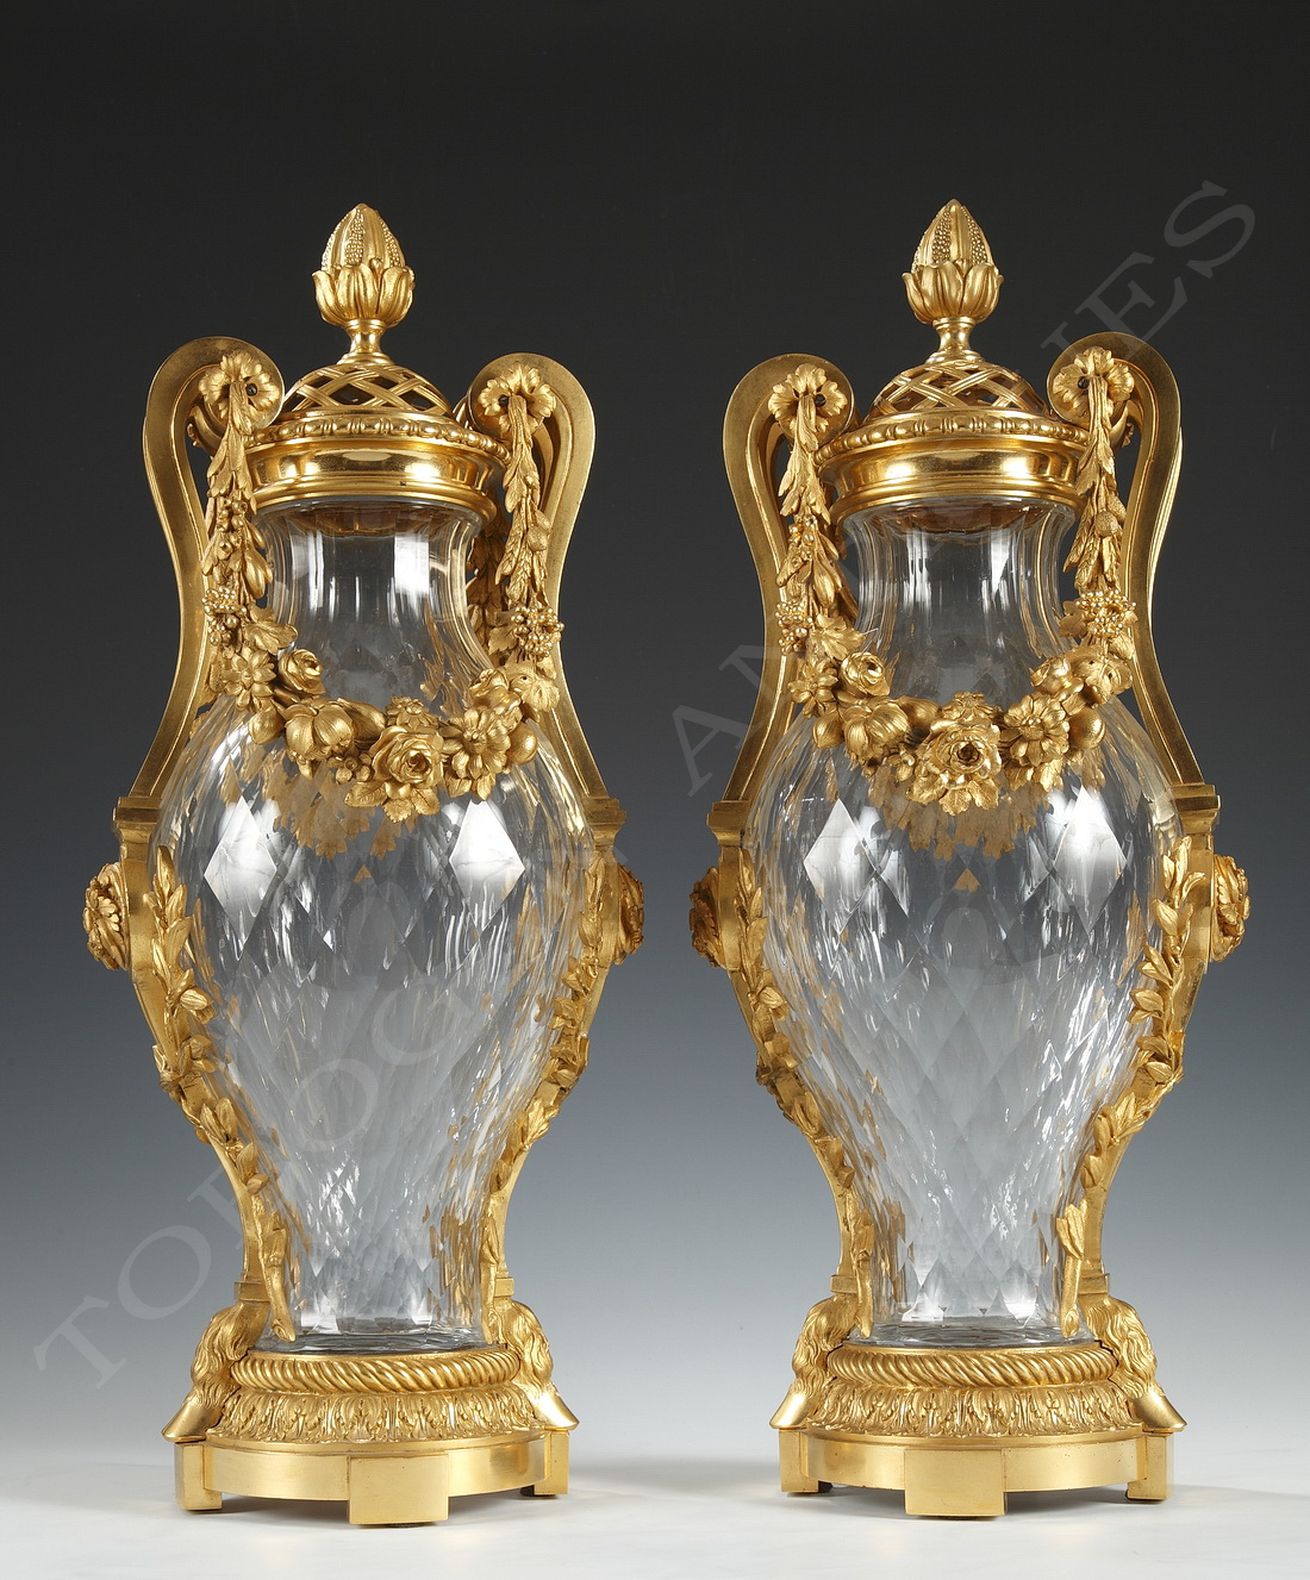 Baccarat & H. Dasson <br/> Pair of crystal Vases